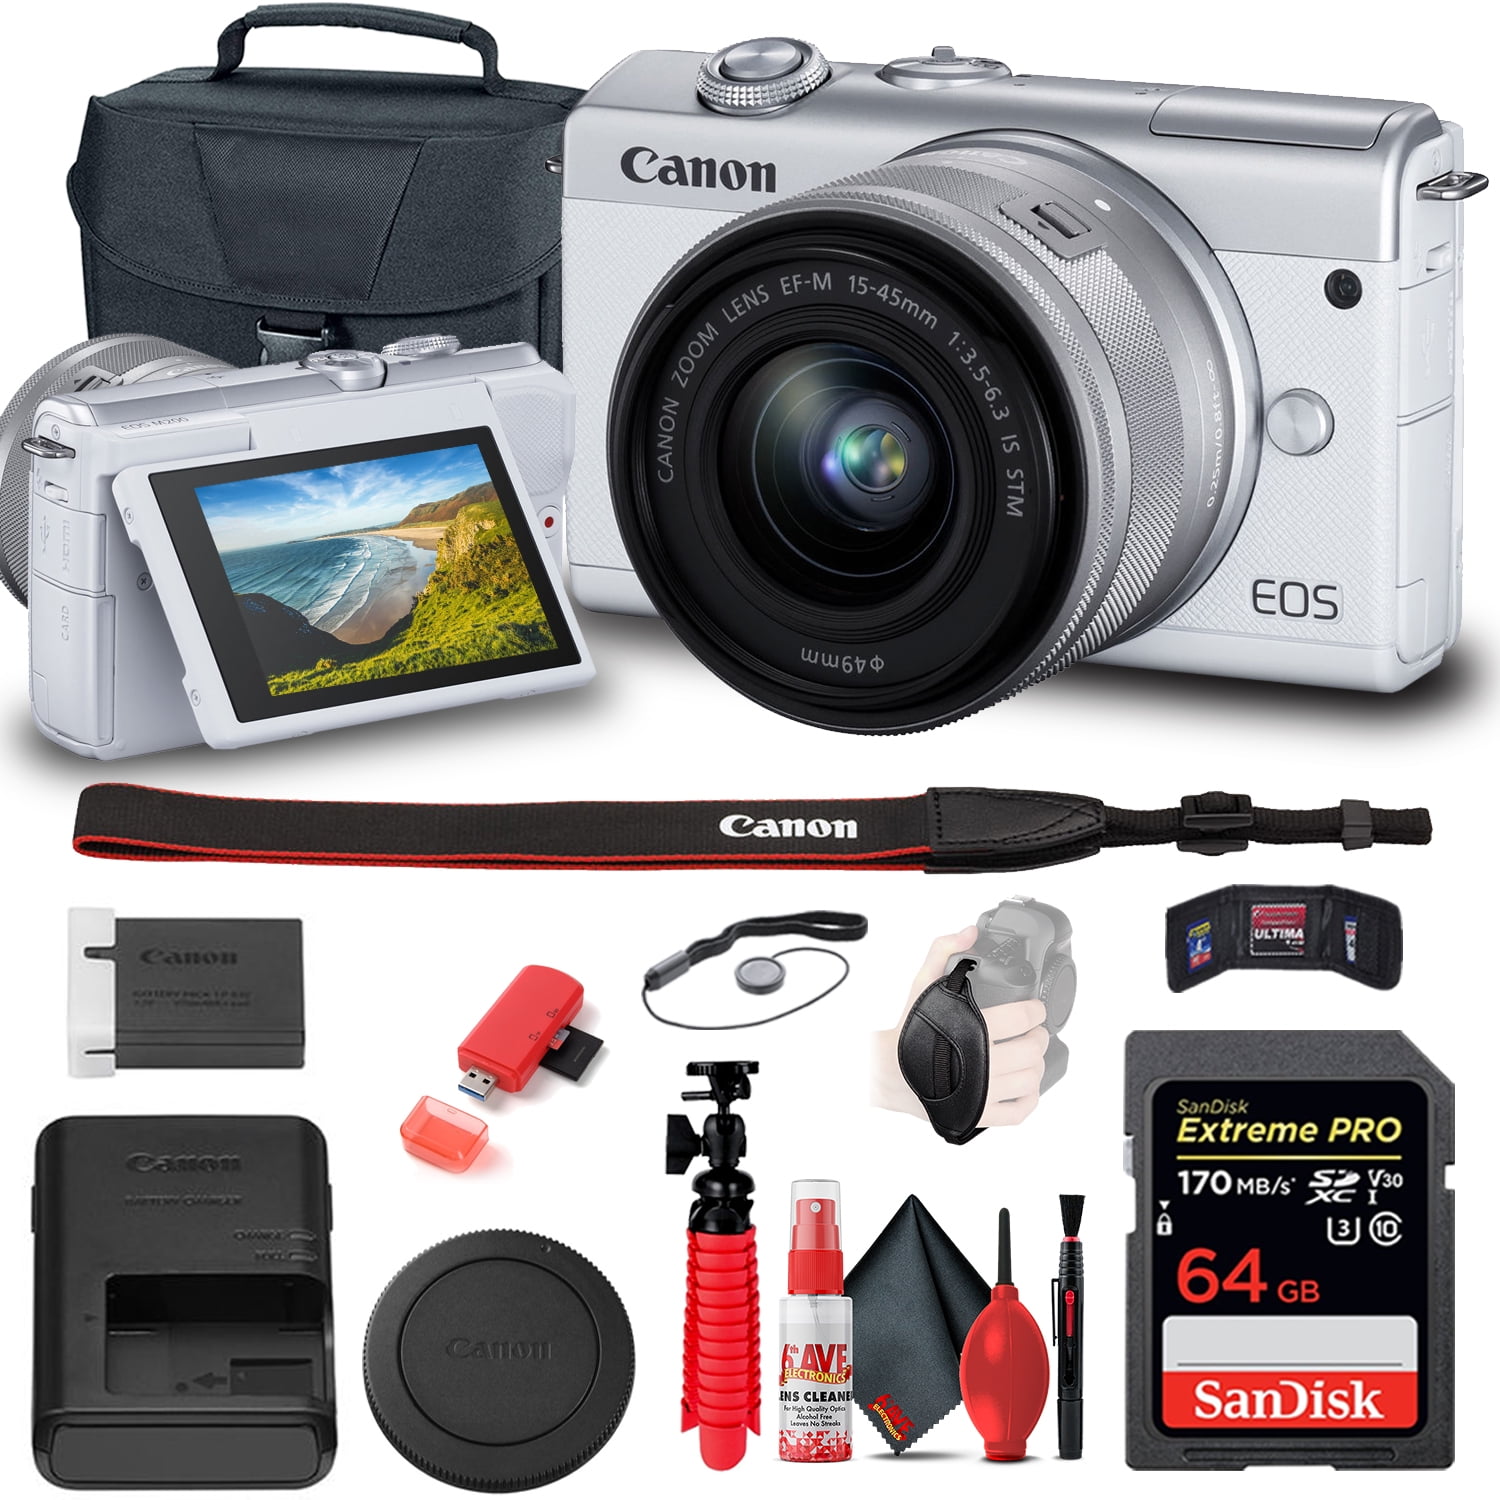 Canon Black EOS M50 Mirrorless Camera with 24.1 MegaPixels, 15-45mm Lens  Included - Walmart.com